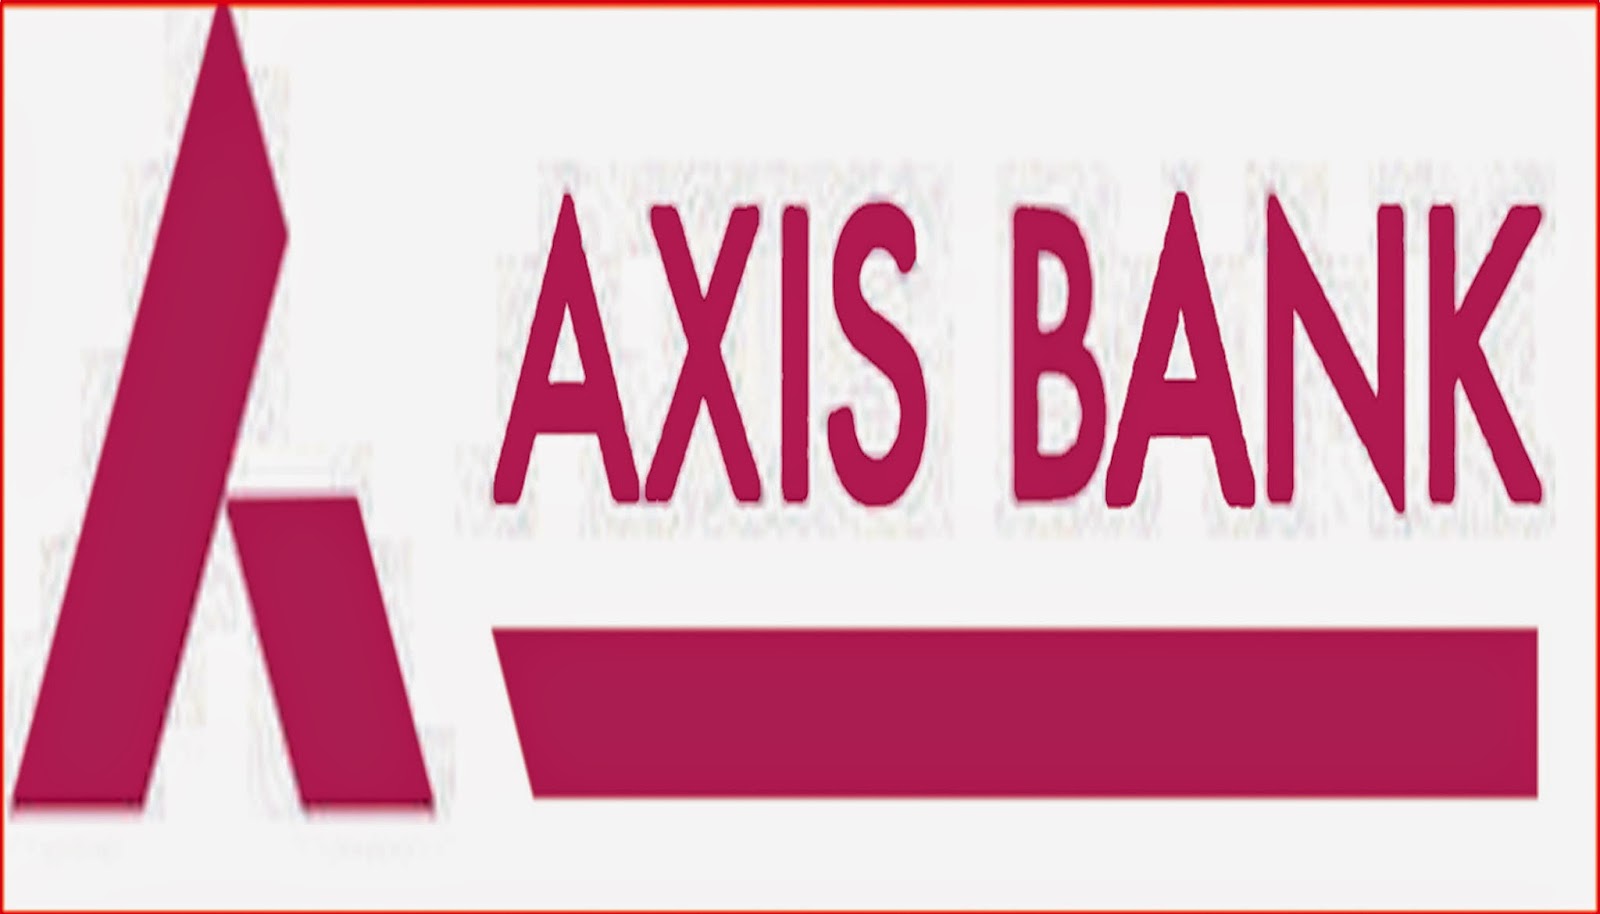 axis bank power home loan statement download